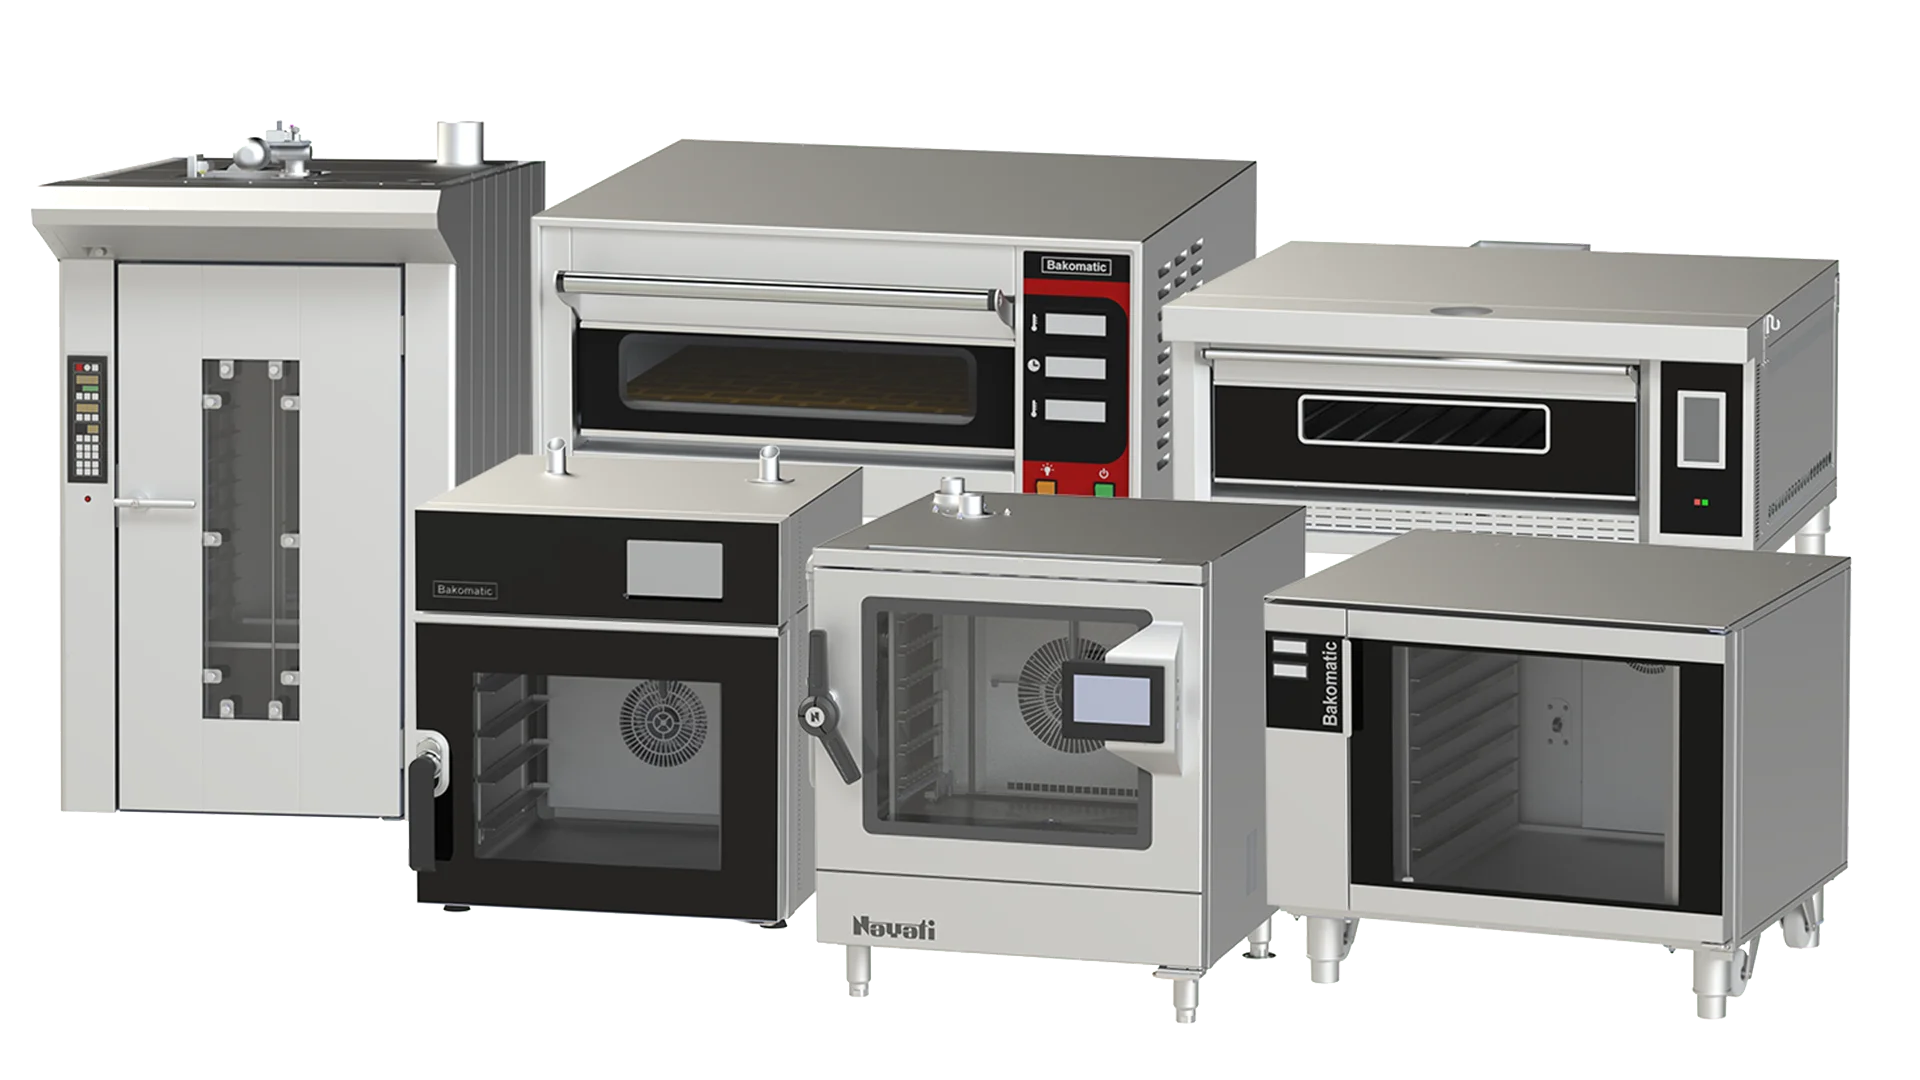 Nayati Oven Equipment series suitable for expert bakers